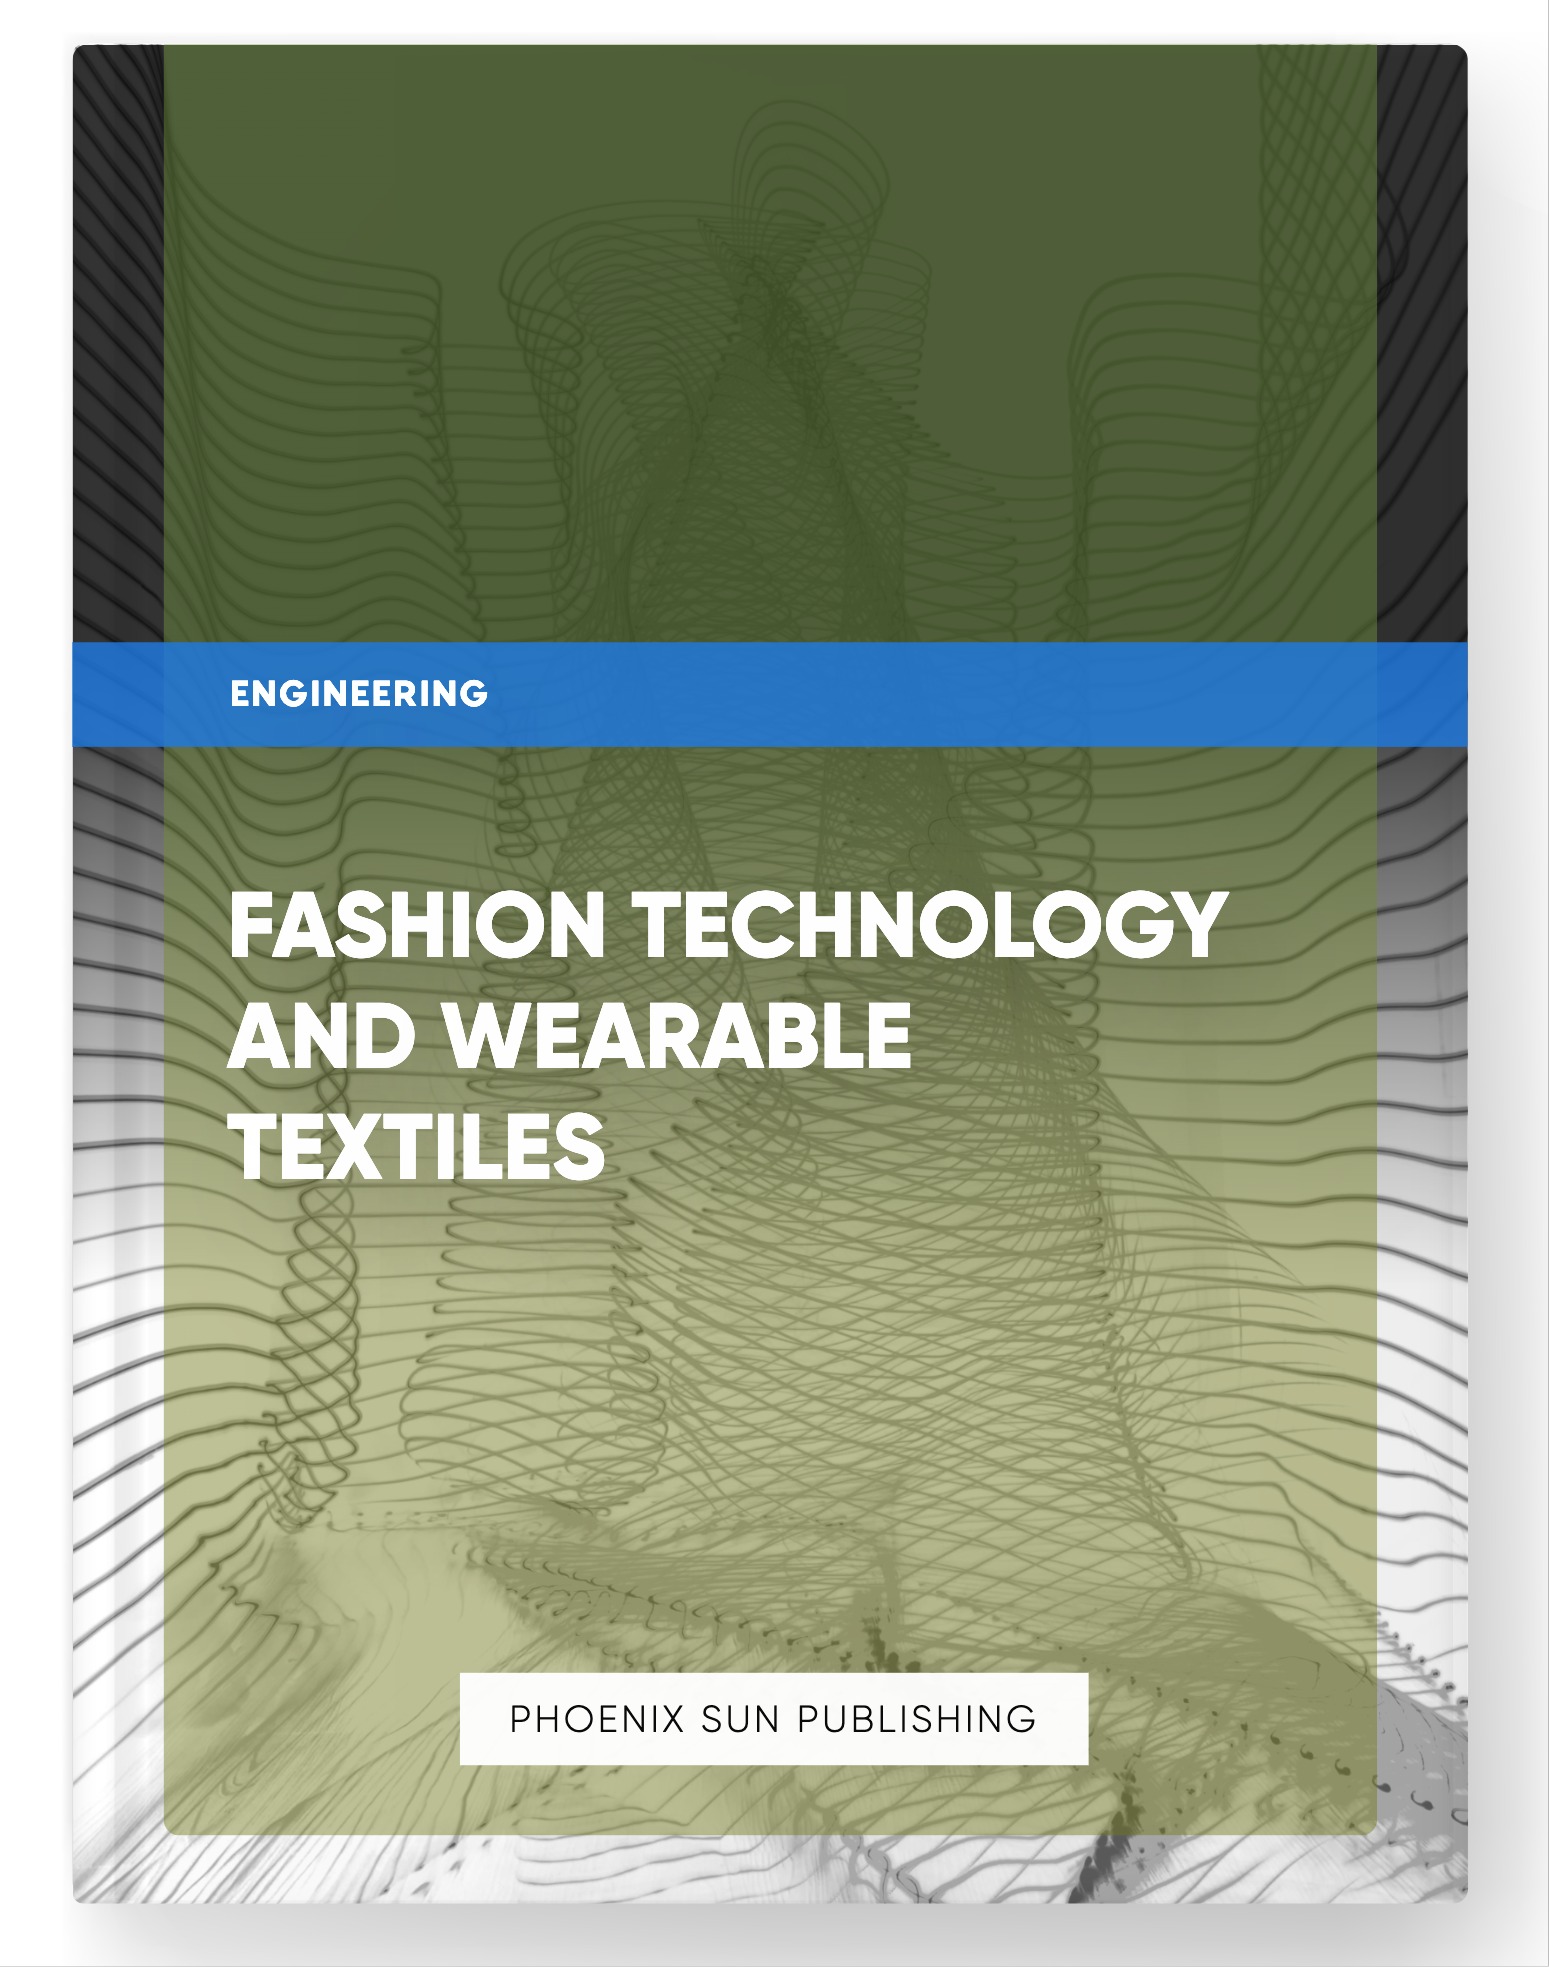 Fashion Technology and Wearable Textiles